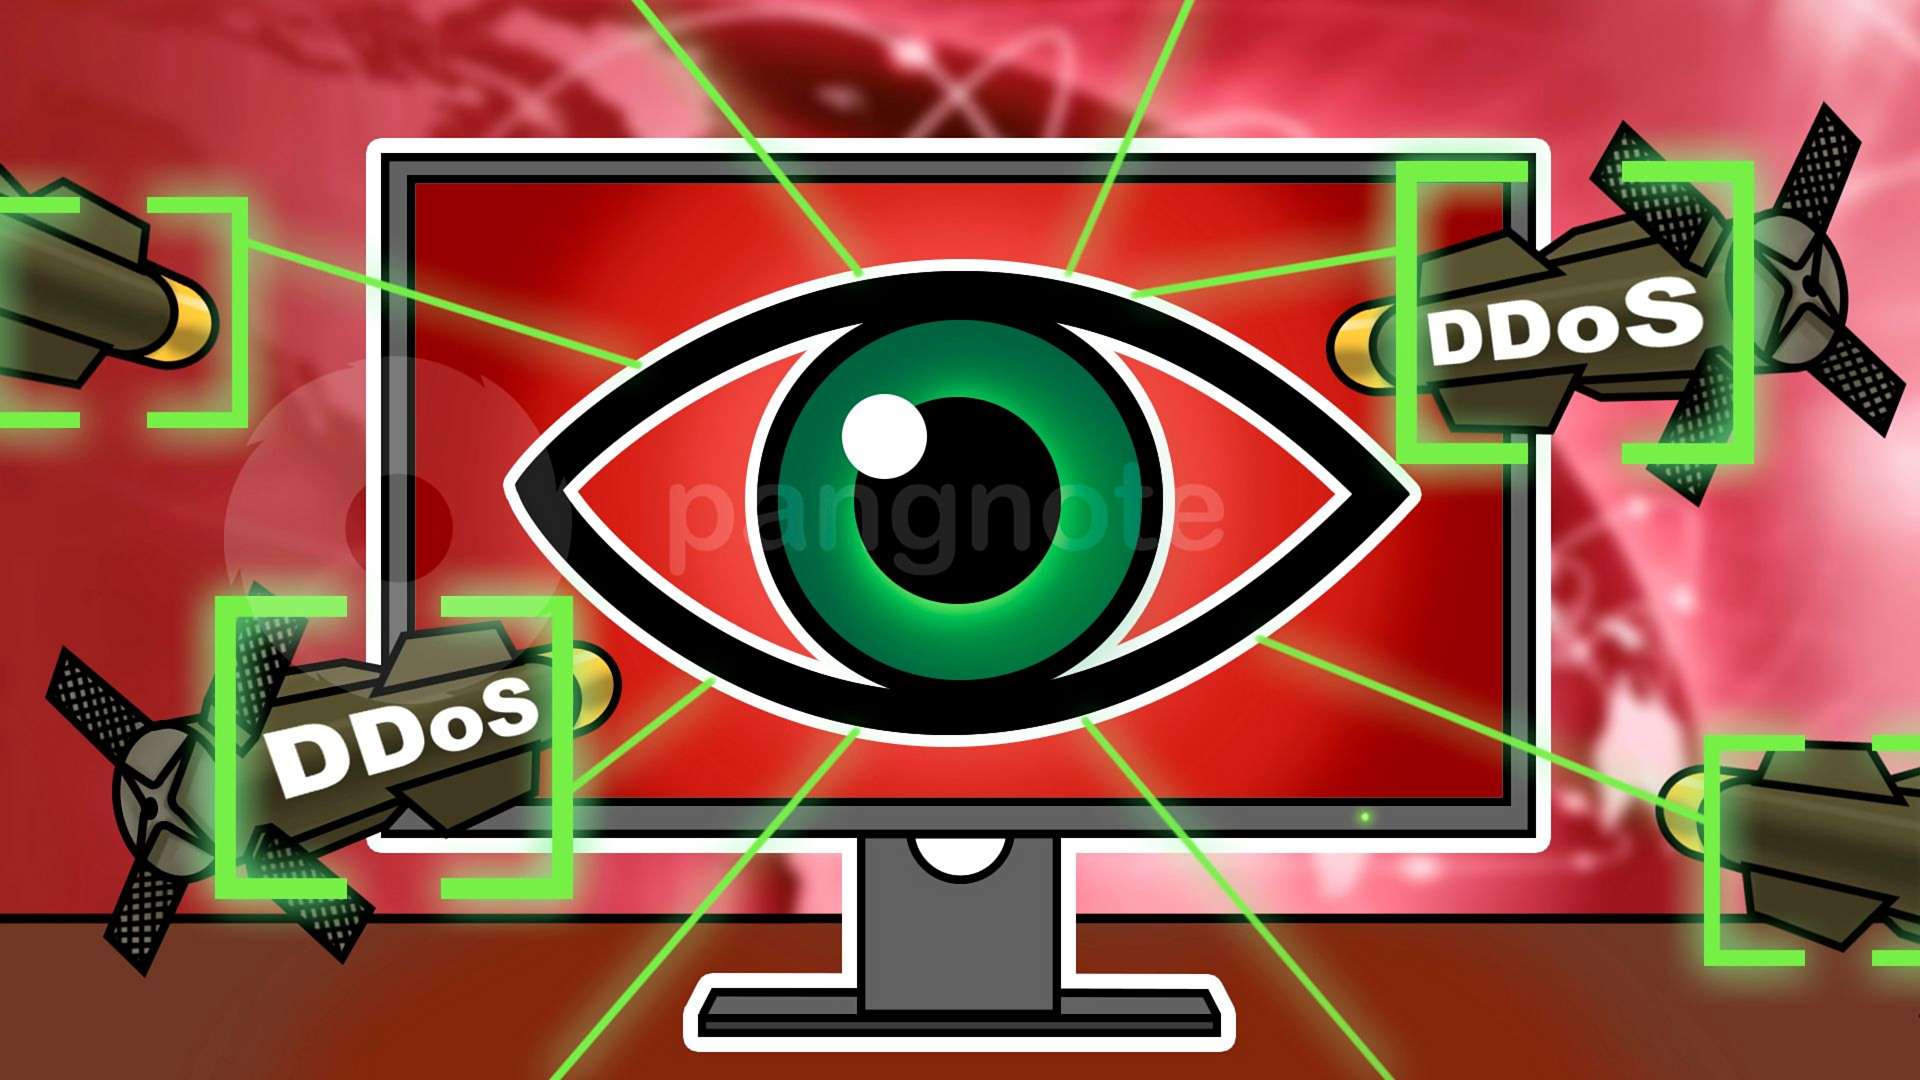 Use monitoring service for early detection of DDOS attacks